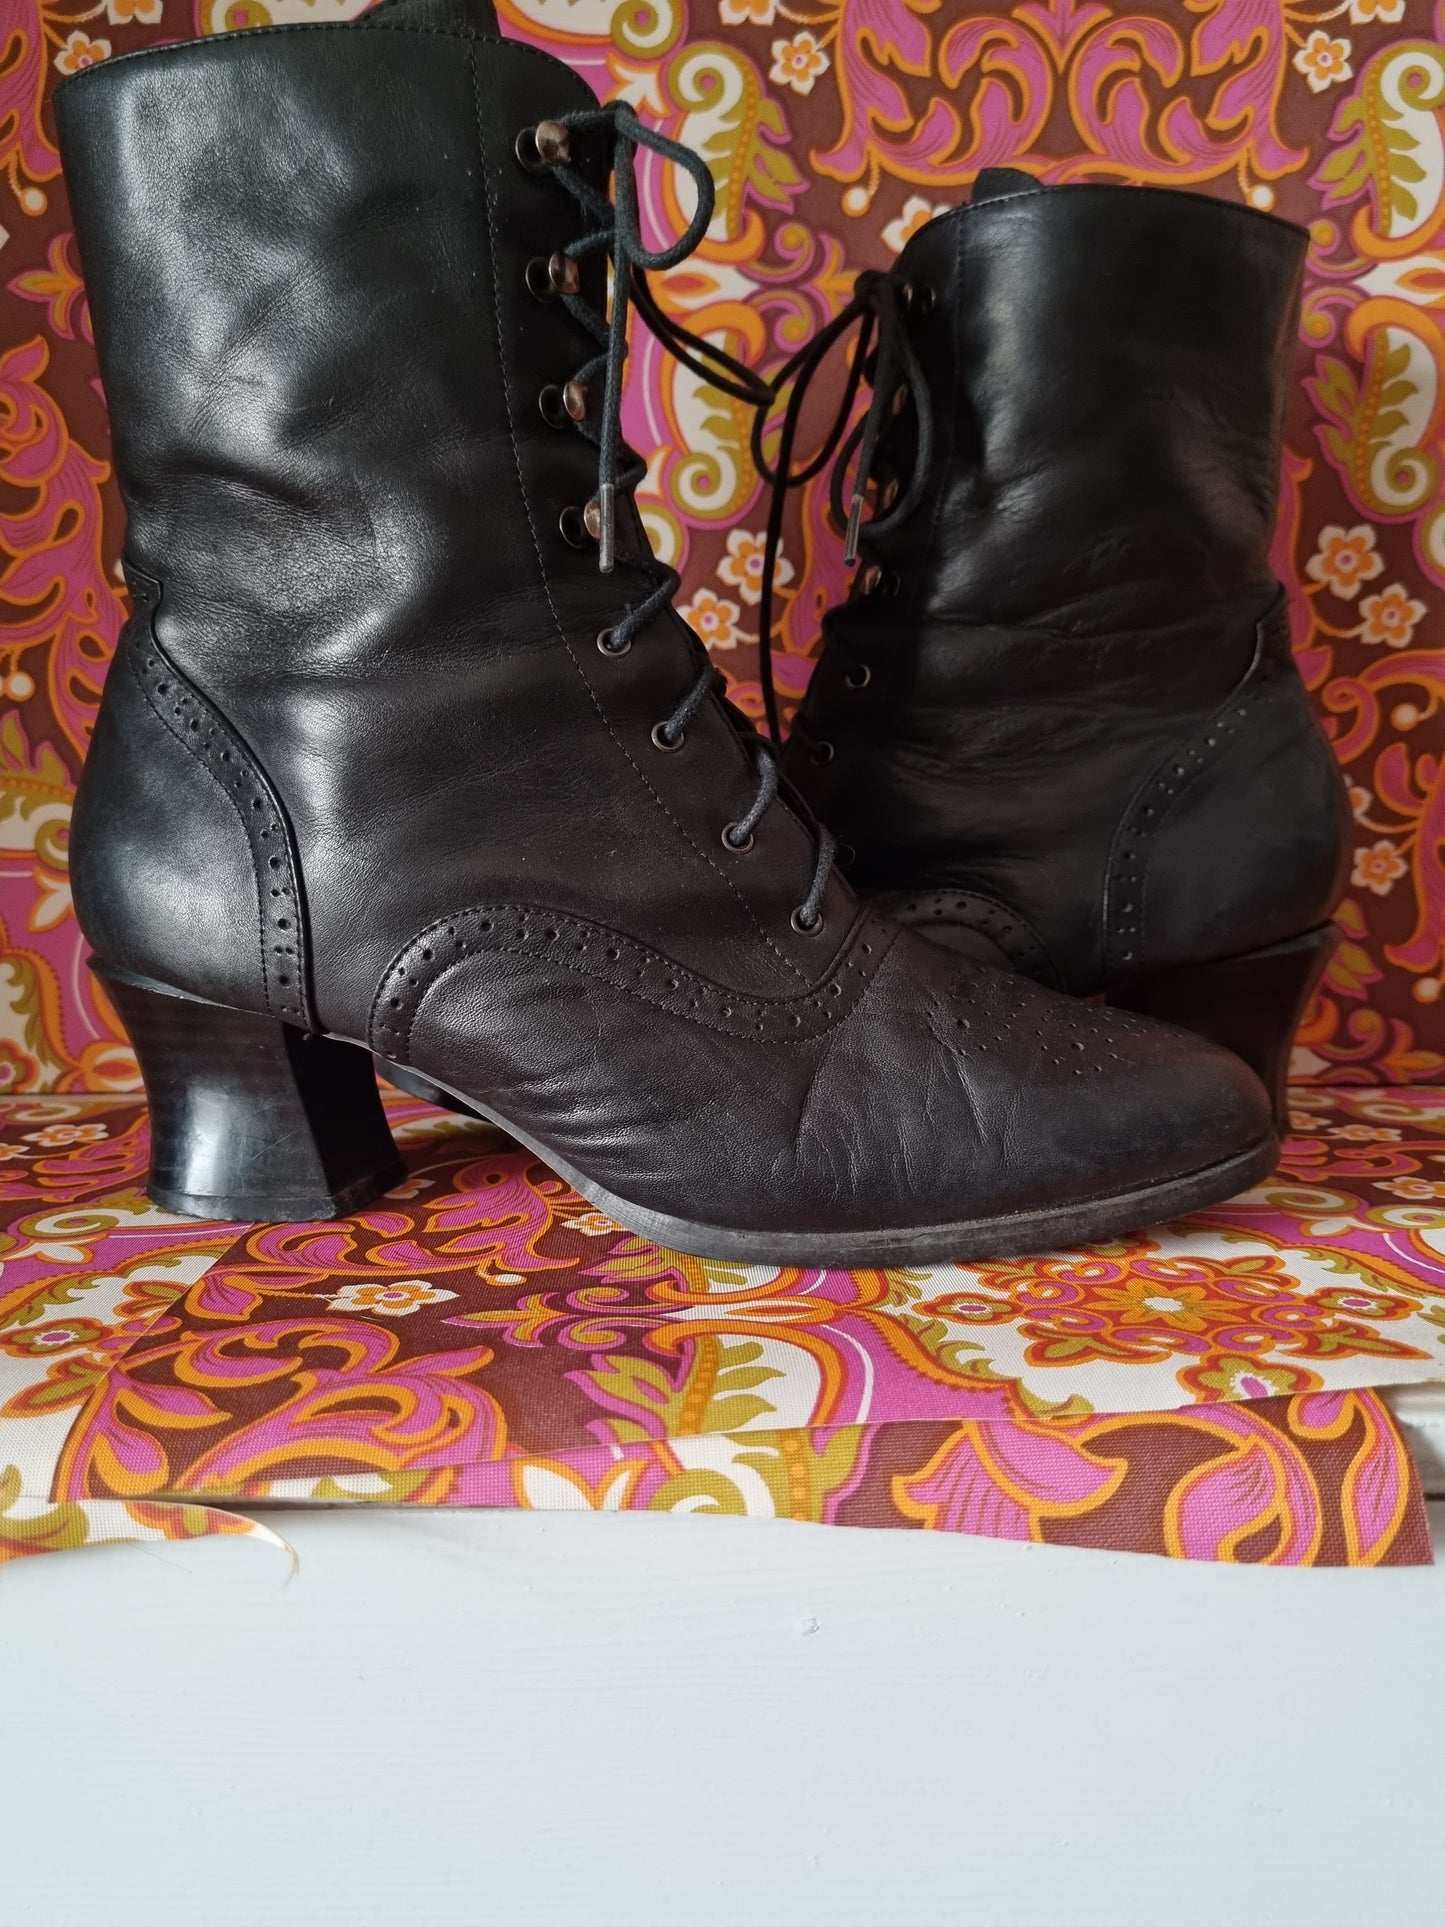 Reserved Vintage lace up ankle boots uk size 6 Eur 39 us 8